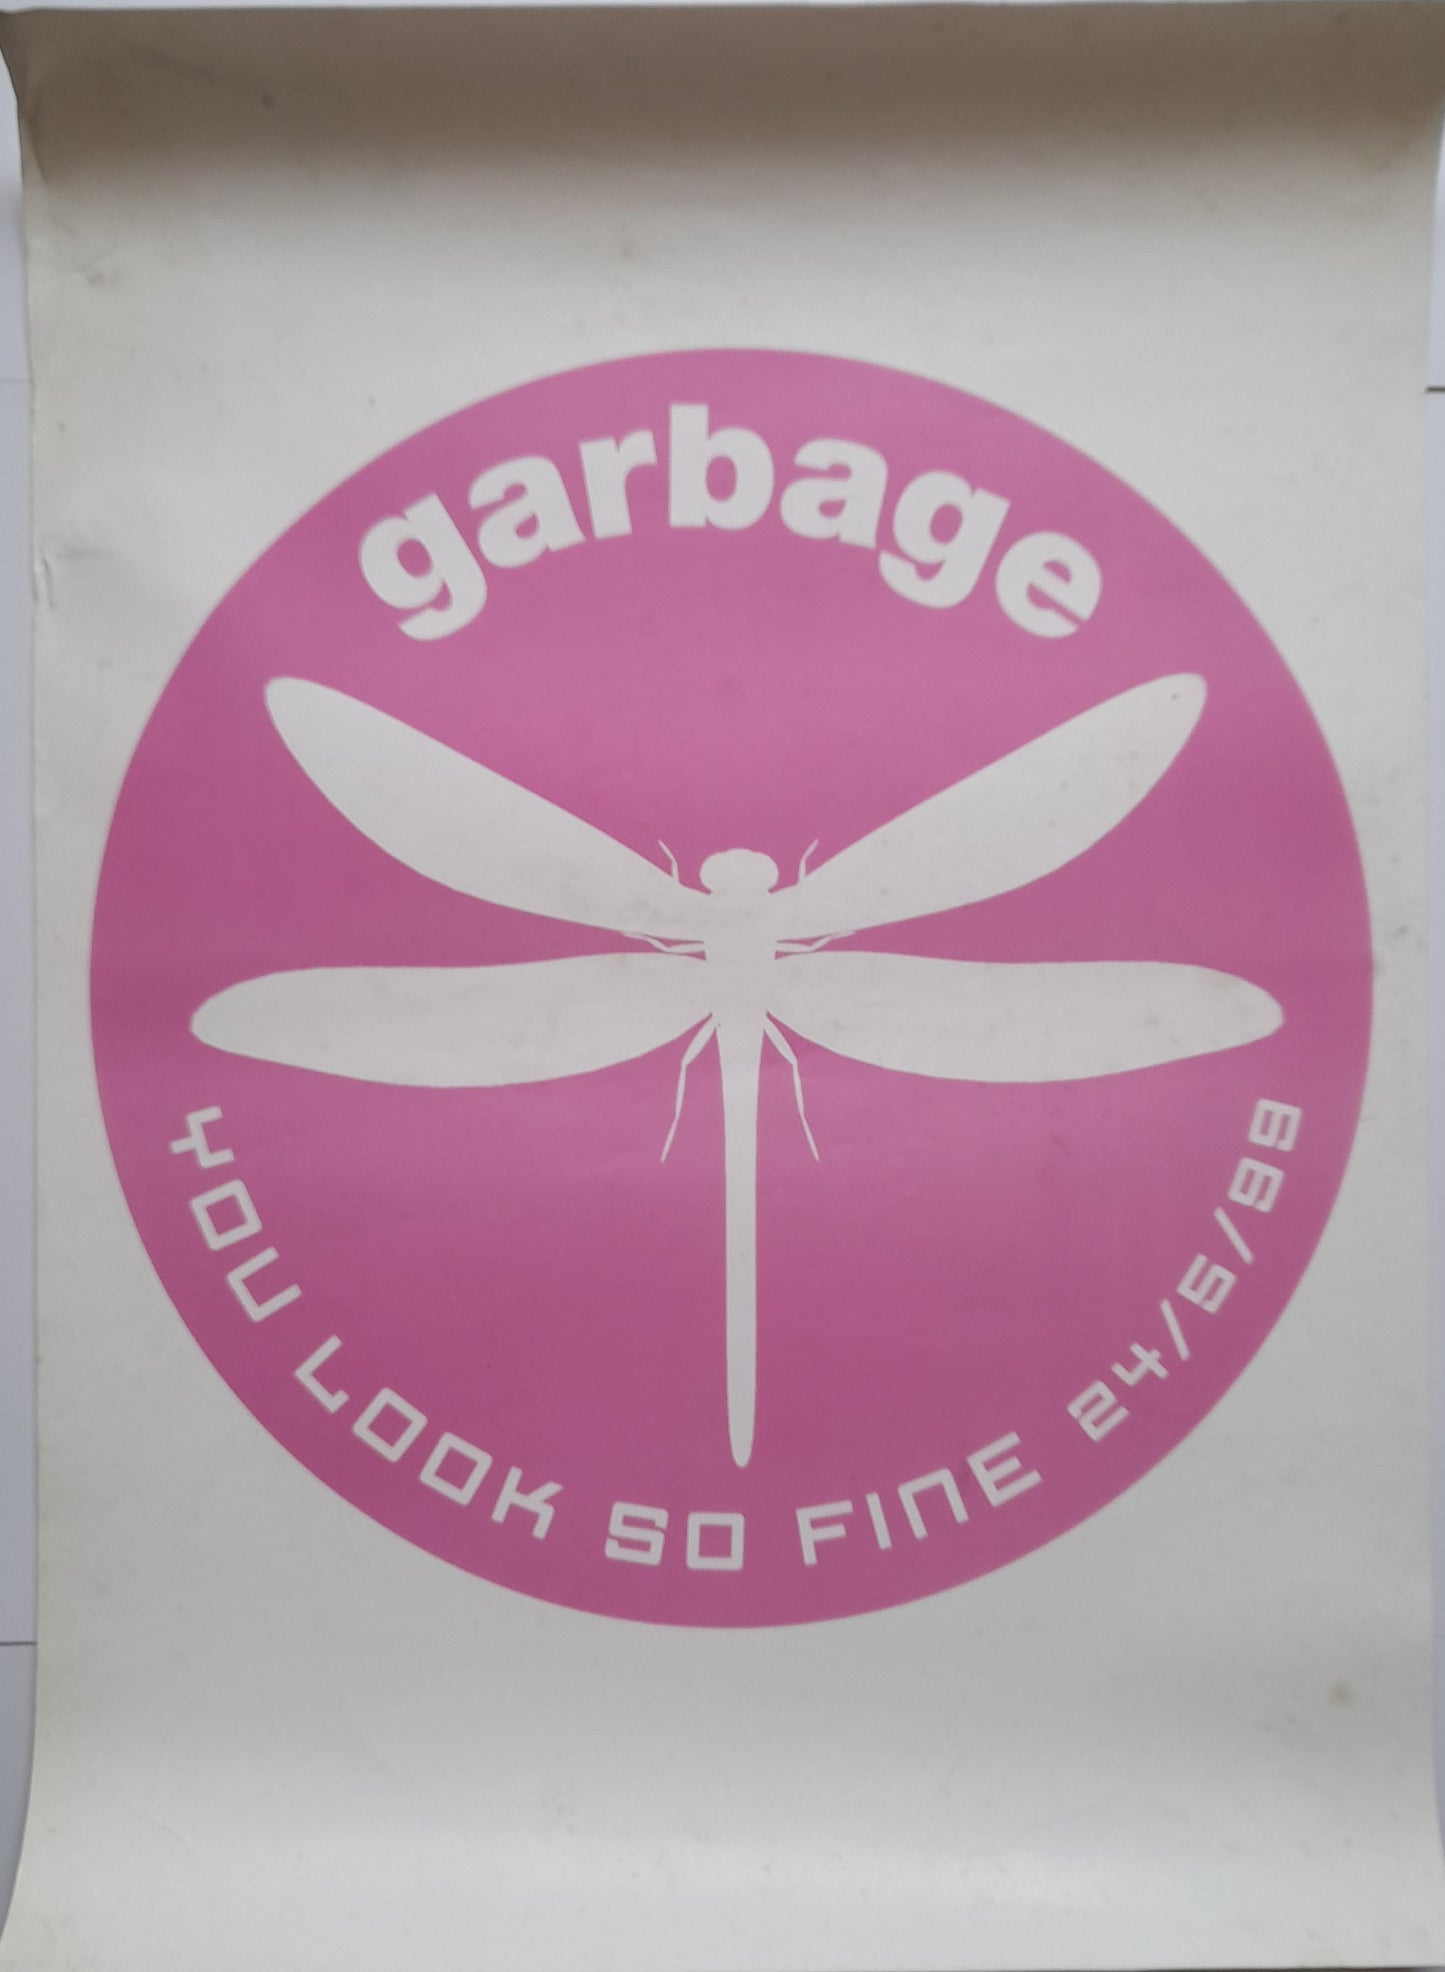 Garbage - You Look So Fine single UK Promotional Poster